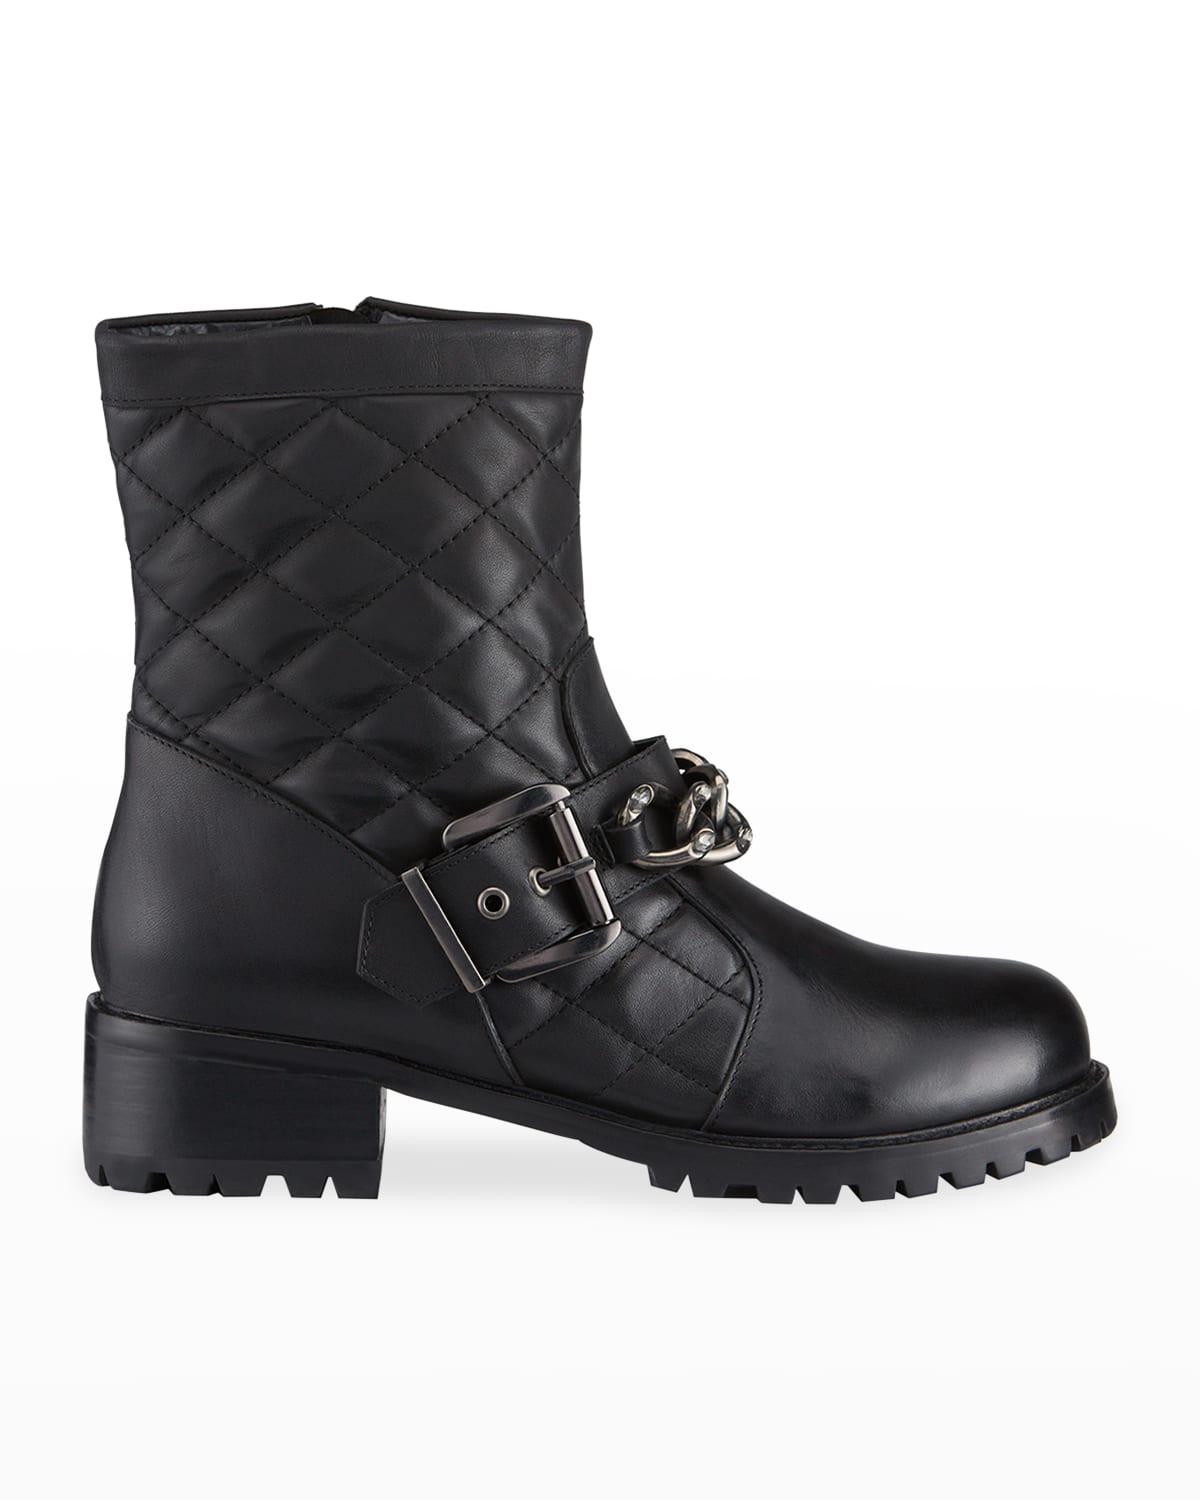 Allegra James Cate Quilted Leather Chain Biker Boots